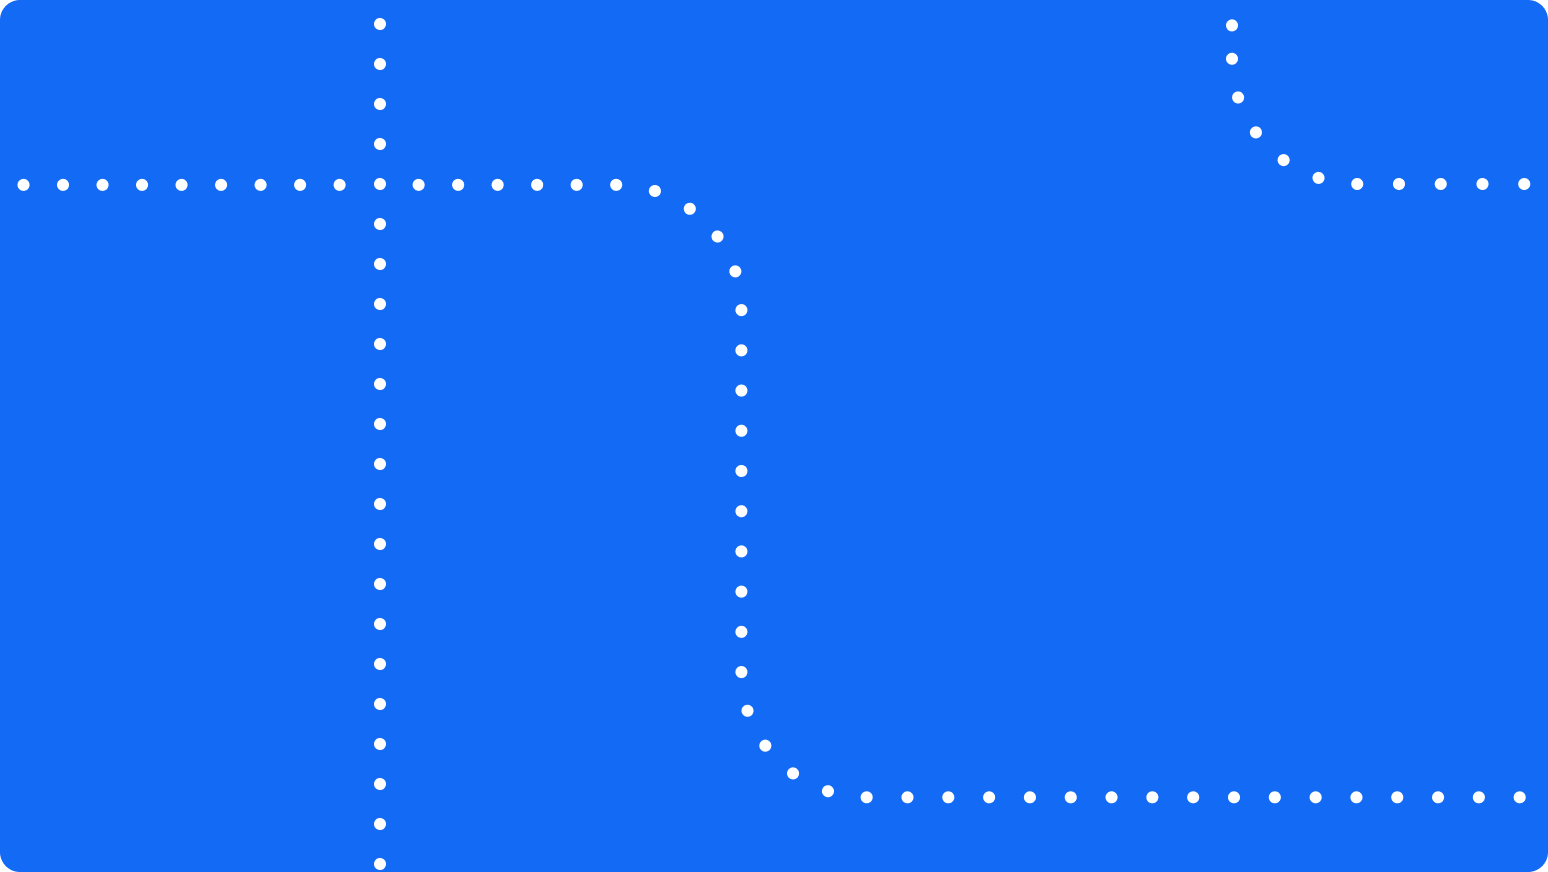 A blue rectangle with white dotted lines running through it.